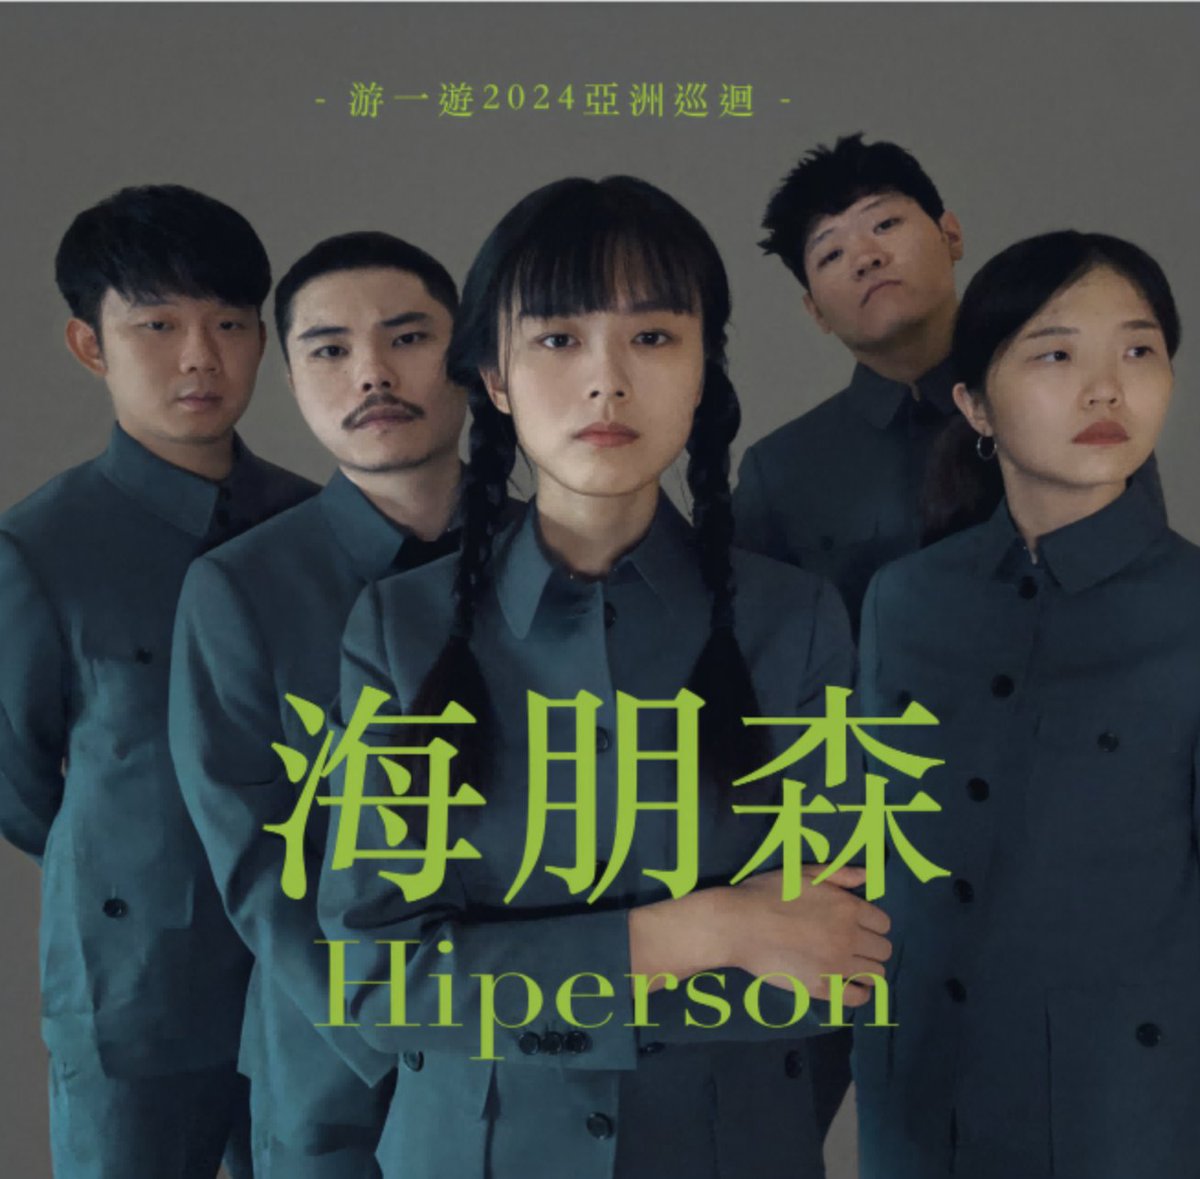 Psyched to work with Hiperson for its Asia tour TPE web3 ticketing!  

Hailing from Chengdu, Hiperson has been dropping musical gems since their 2015 debut album, 'I Don't Want Any Other History.' Their 2020 release, 'Growing Up Fiction,' blends poetic storytelling with hardcore